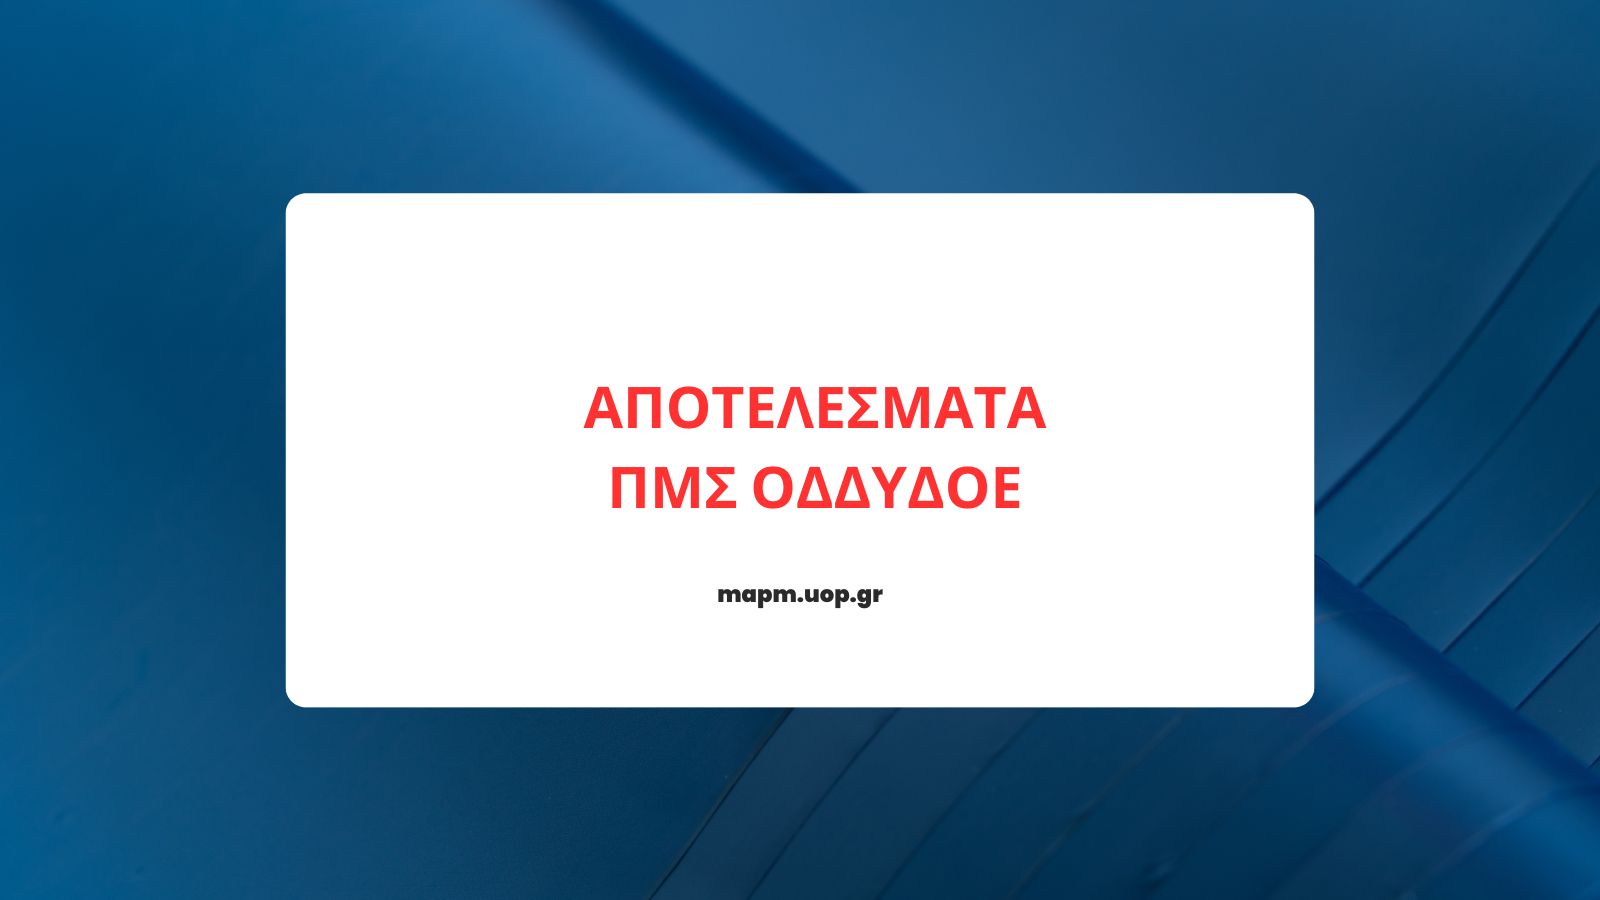 Read more about the article ΑΠΟΤΕΛΕΣΜΑΤΑ ΠΜΣ ΟΔΔΥΔΟΕ